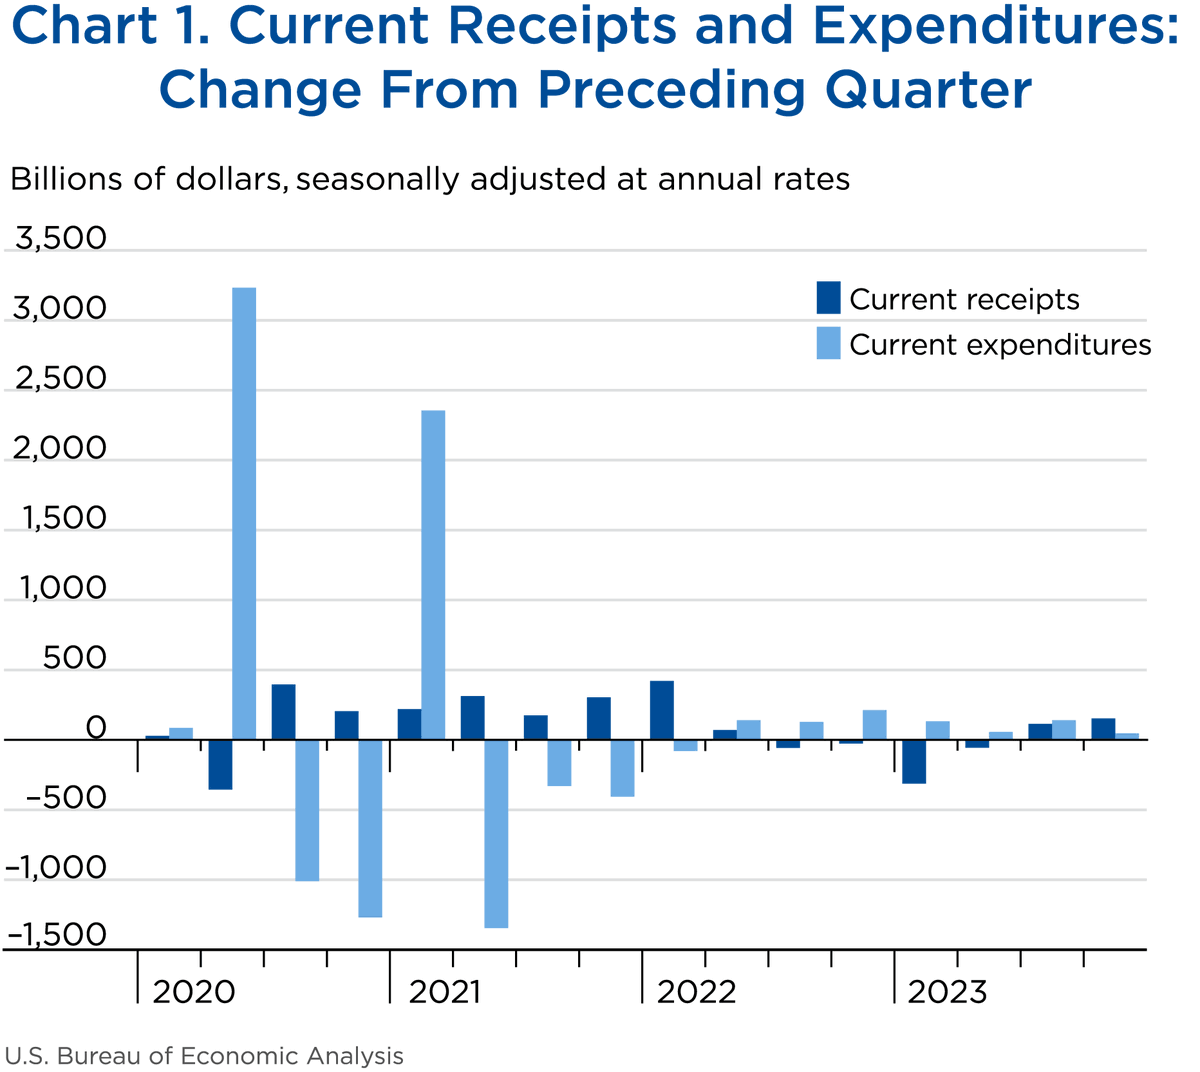 The latest from the Survey of Current Business: A look at government receipts and expenditures in the fourth quarter of 2023. apps.bea.gov/scb/issues/202… #SCB #BEAdata